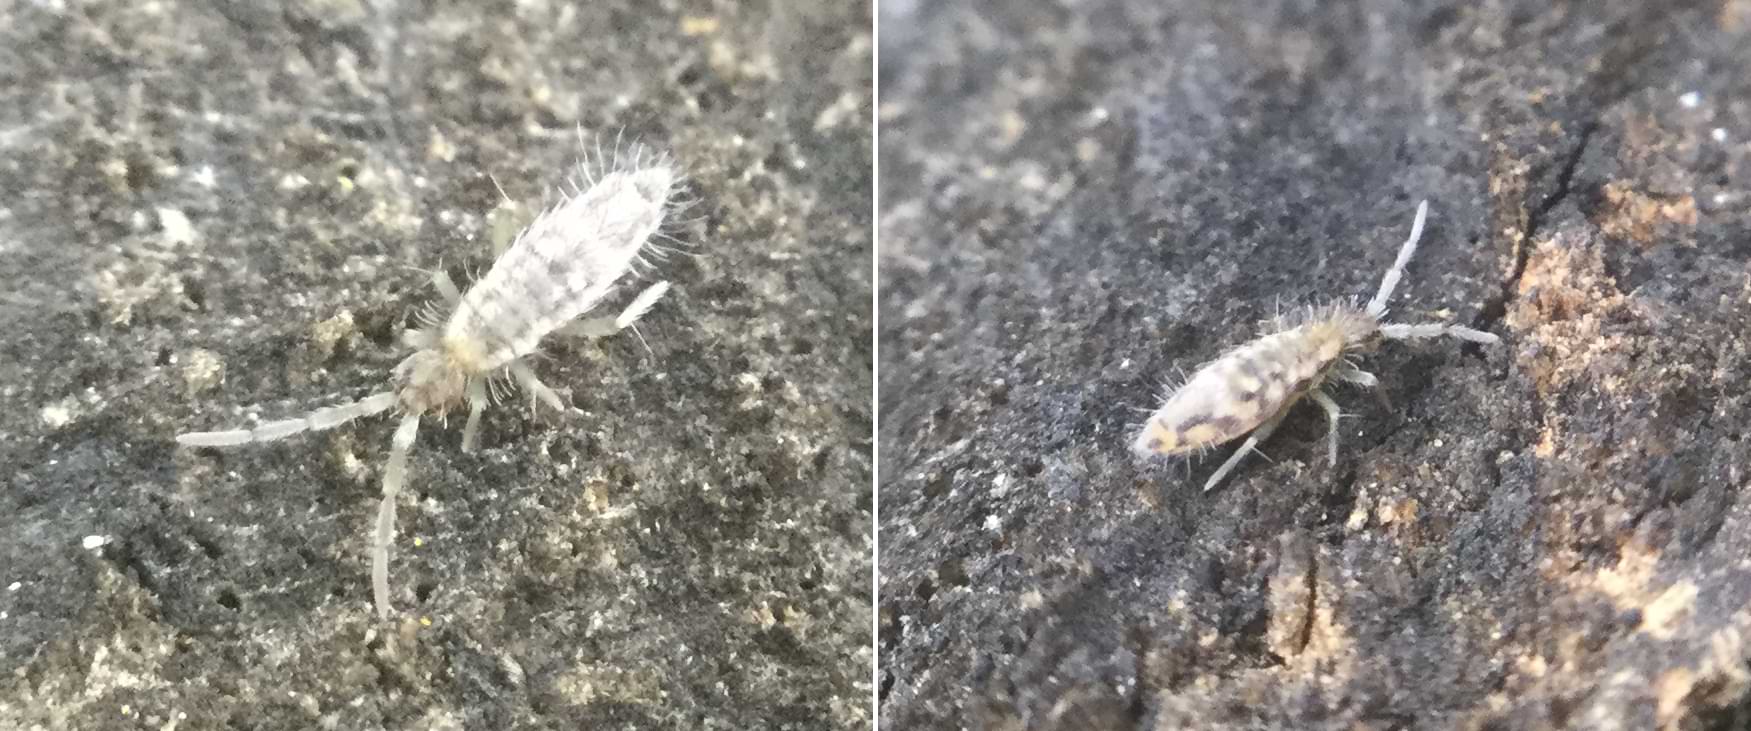 Two photos of springtails on resting on a log. Their body is pale in colour, but has subtle patches of light yellow, black, and brown.